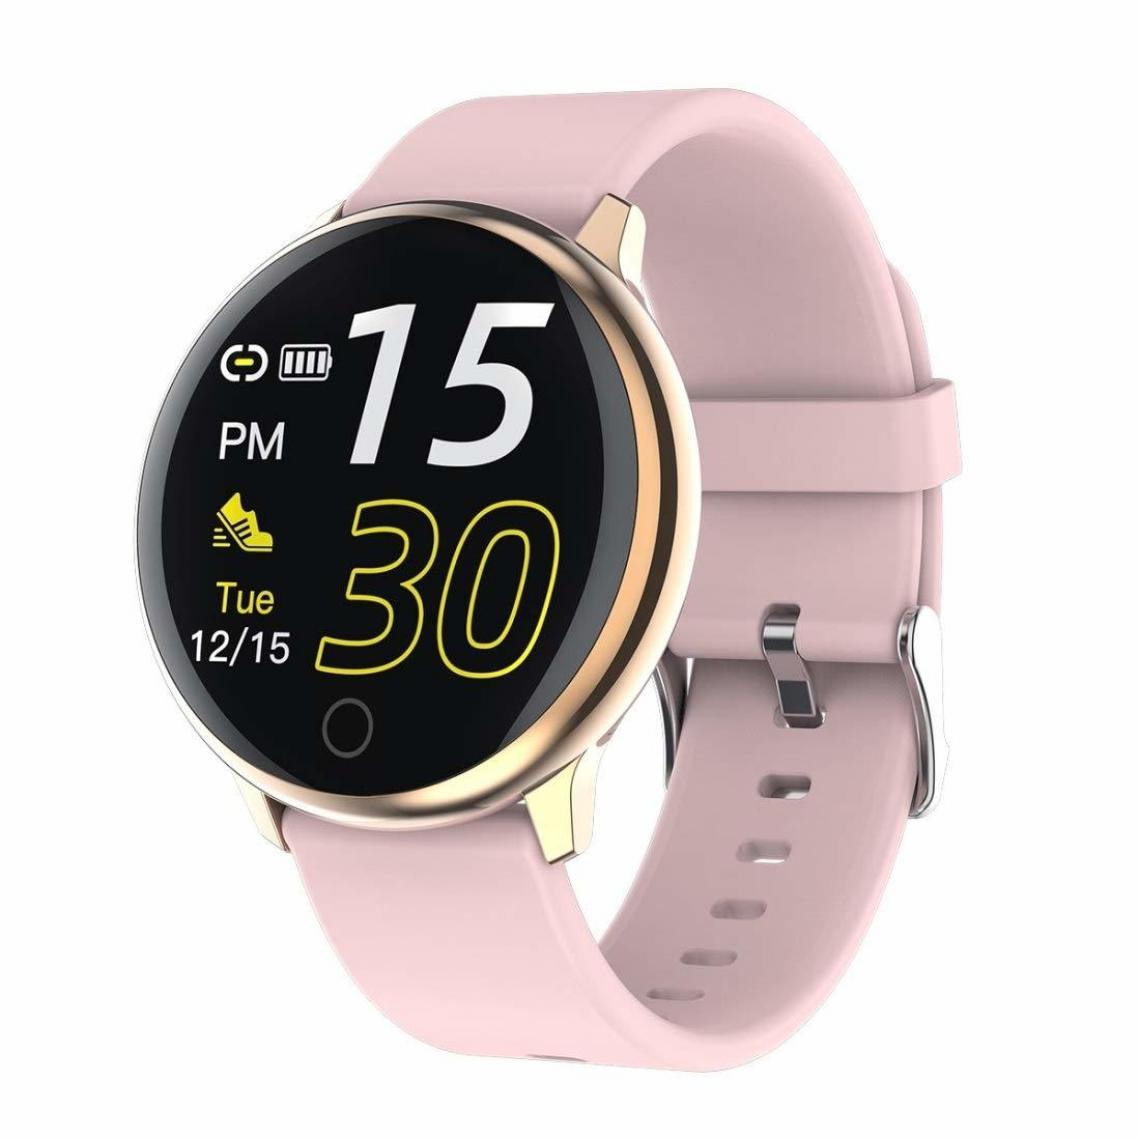 Chronotech Montres - Smart Watch, Q16 1.22-inch IPS Color Smart Watch IP67 Waterproof, Silicone Strap, Support Call Reminder/more Functions/blood Pressure Monitoring/sleep Monitoring (Pink) - Montre connectée